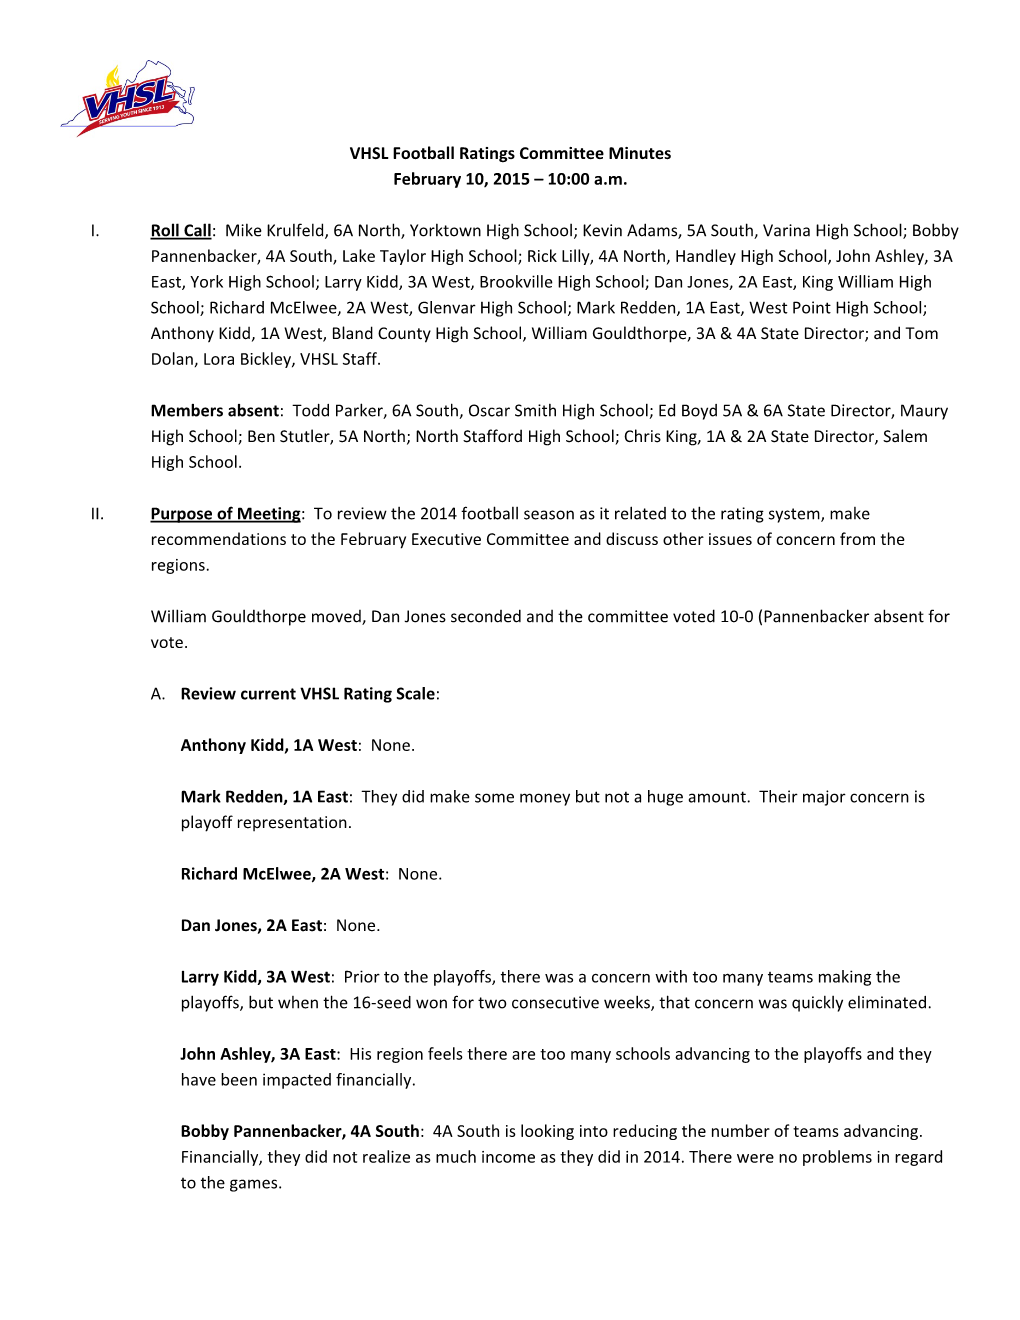 VHSL Football Ratings Committee Minutes February 10, 2015 – 10:00 A.M